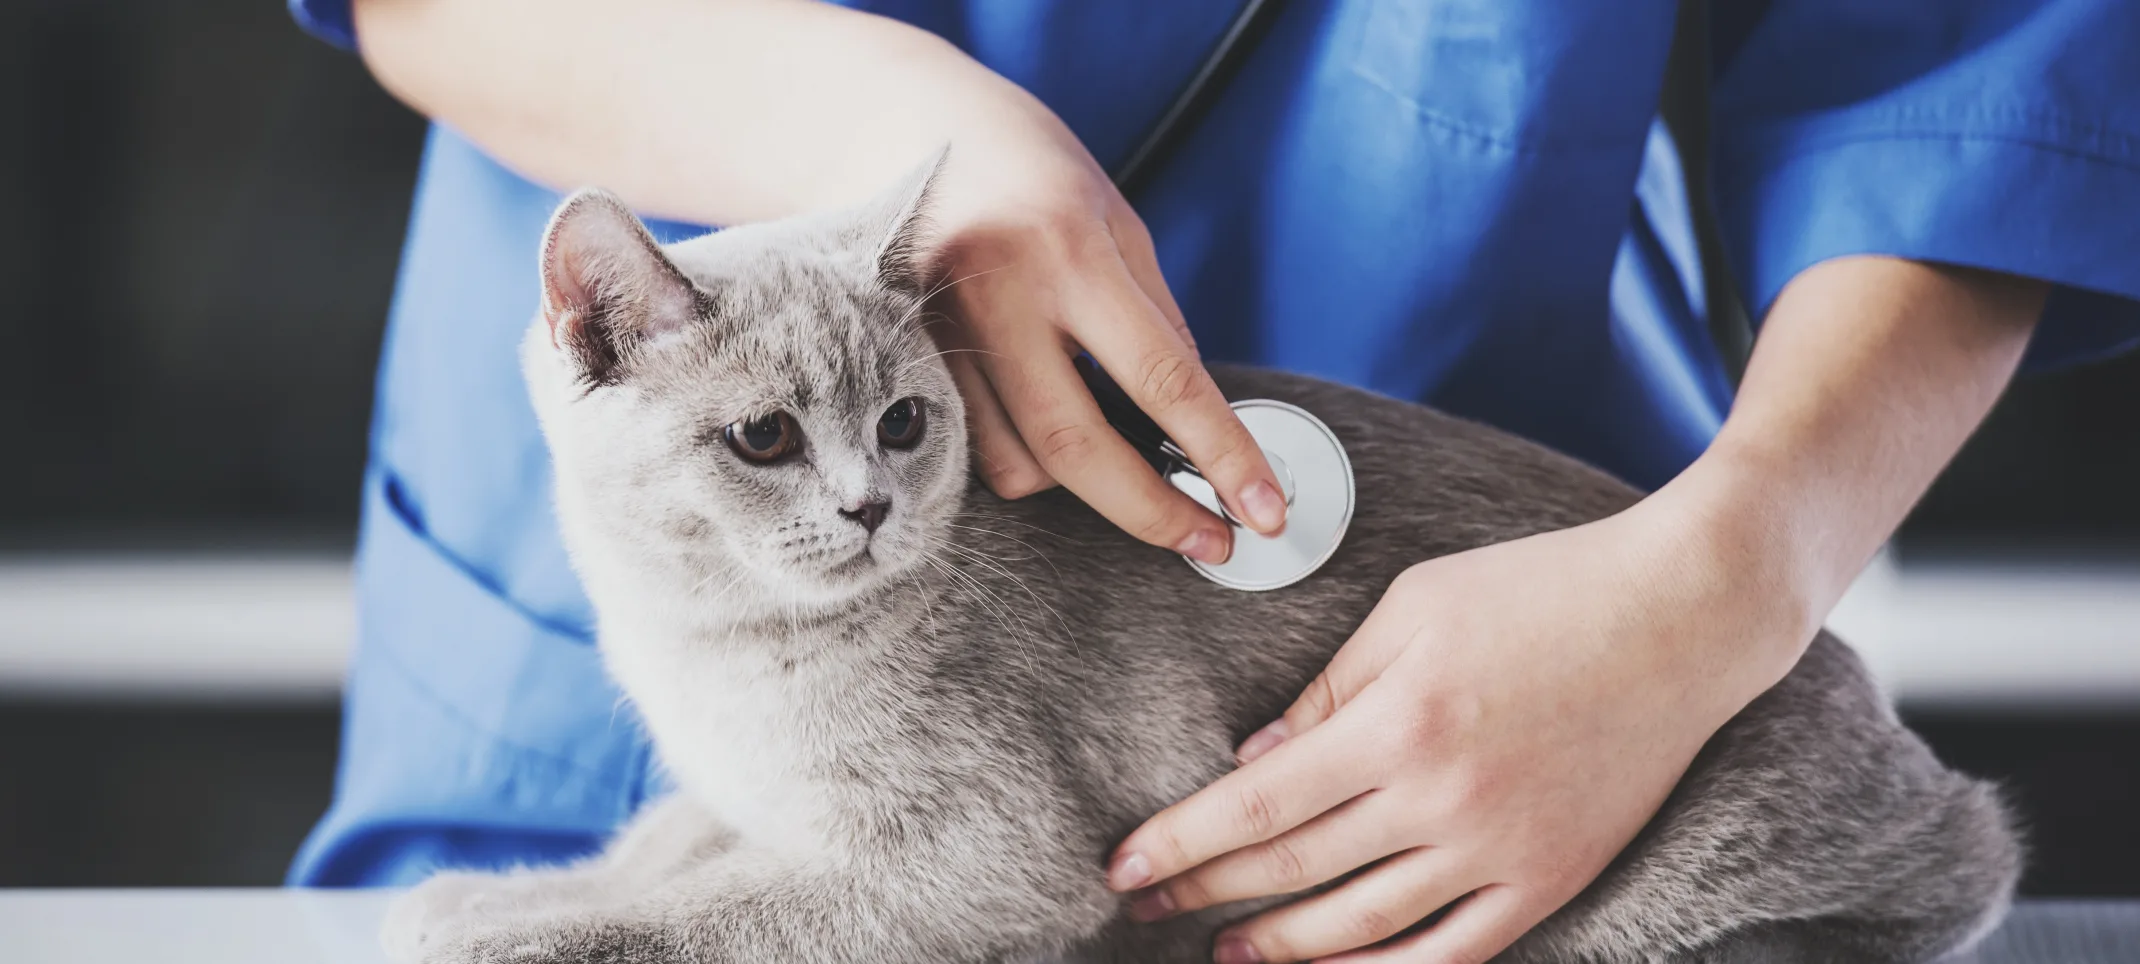 Cat sitting on table with doctor tending to it